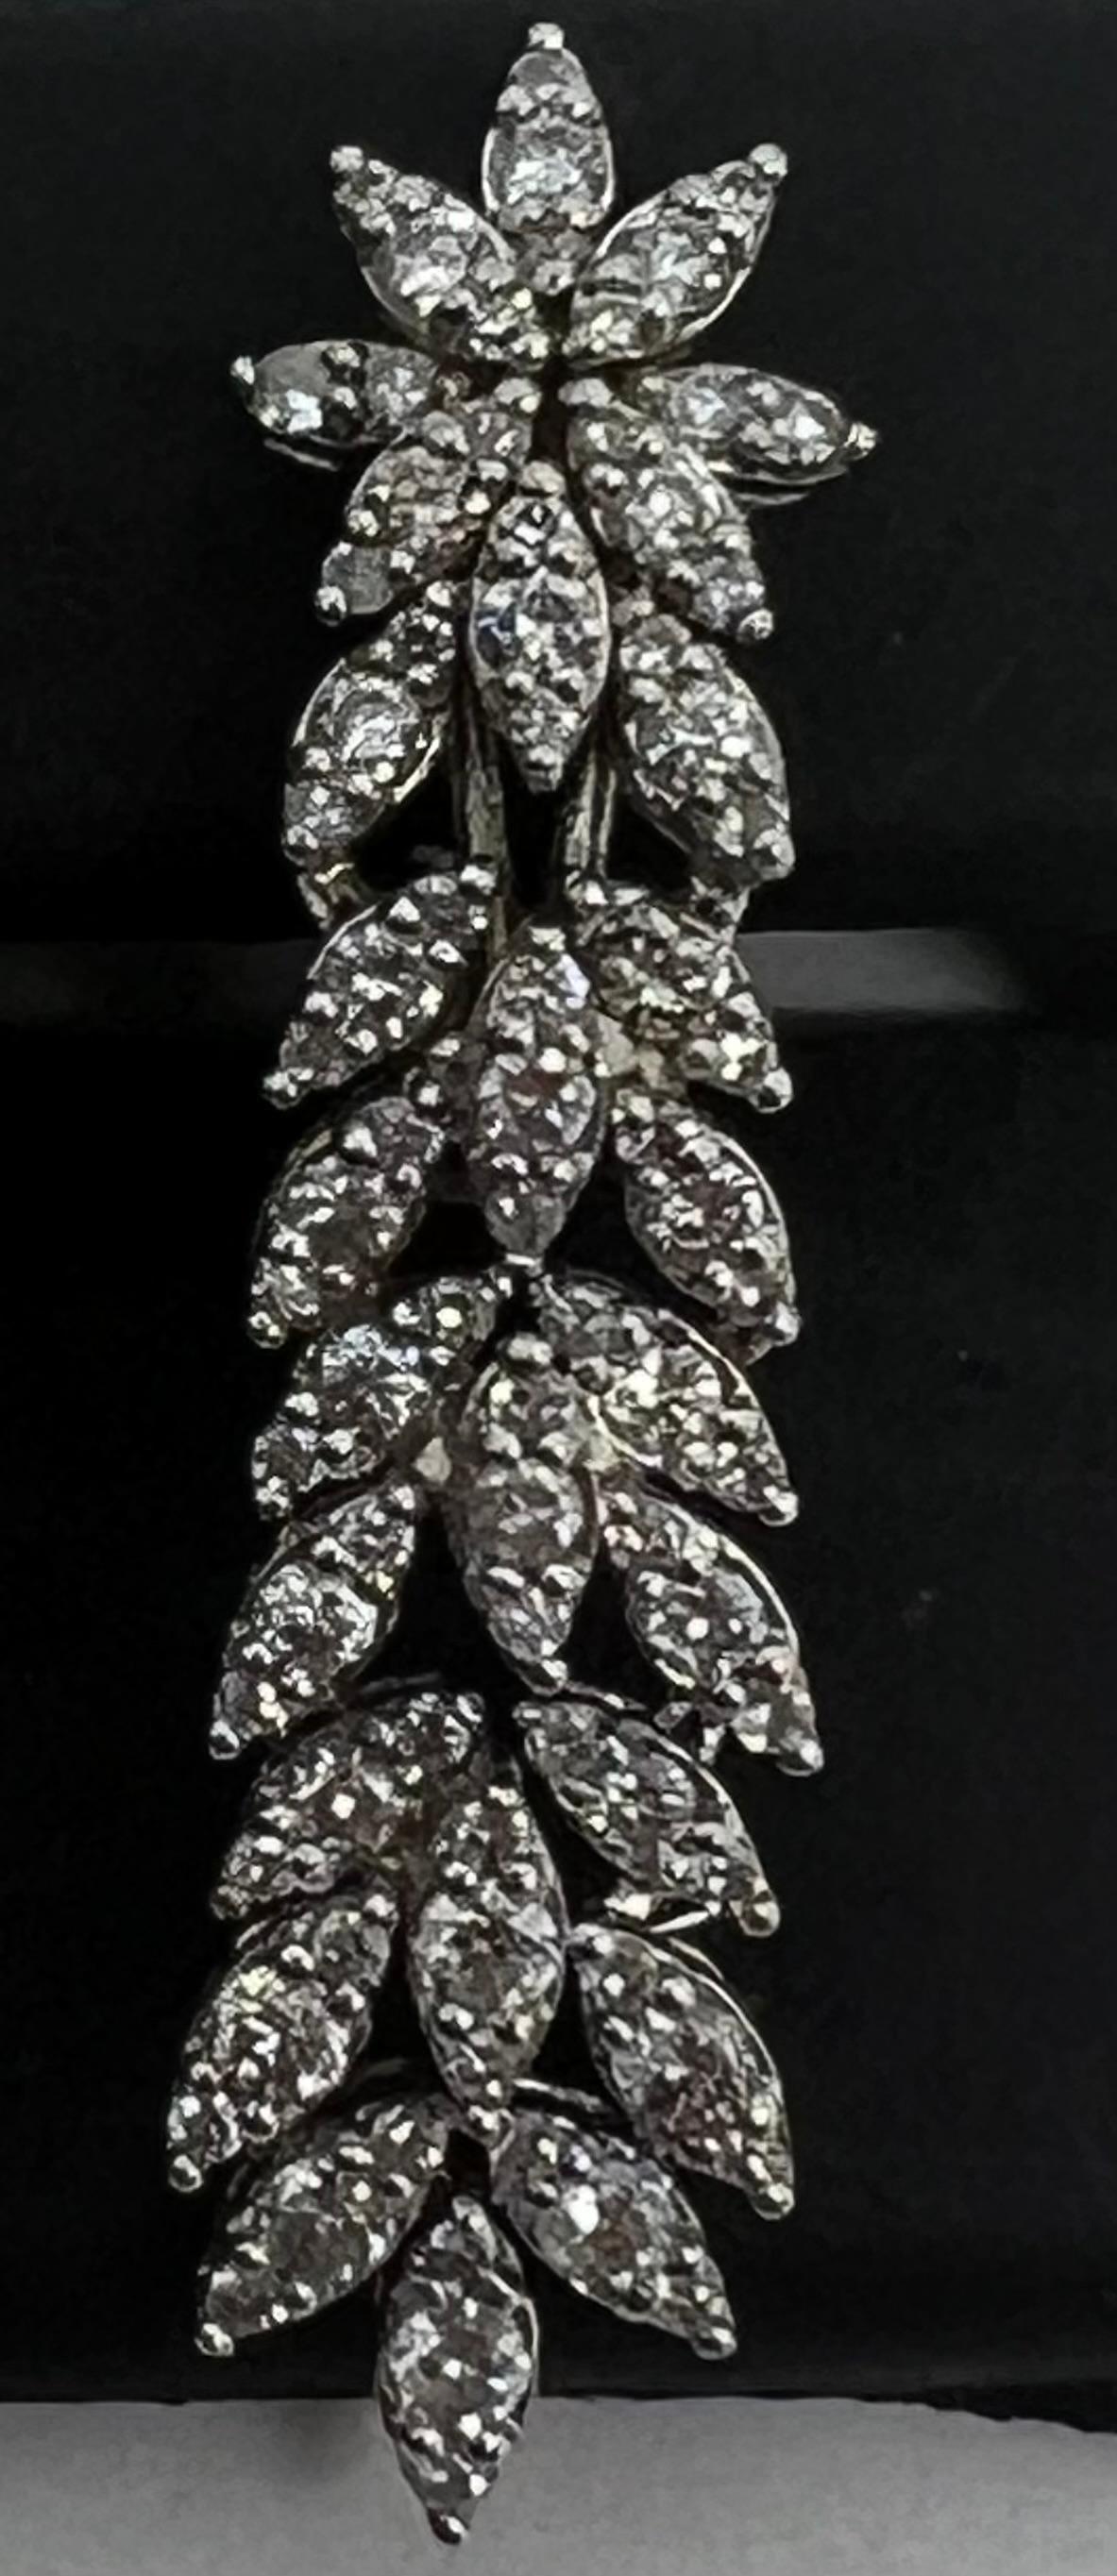 
A stunning pair of dangle earrings made of 14k white gold with a beautiful flower design. The earrings feature a round natural diamond with a total carat weight of 1.05, set in prongs for a secure hold. The white color of the diamond matches the